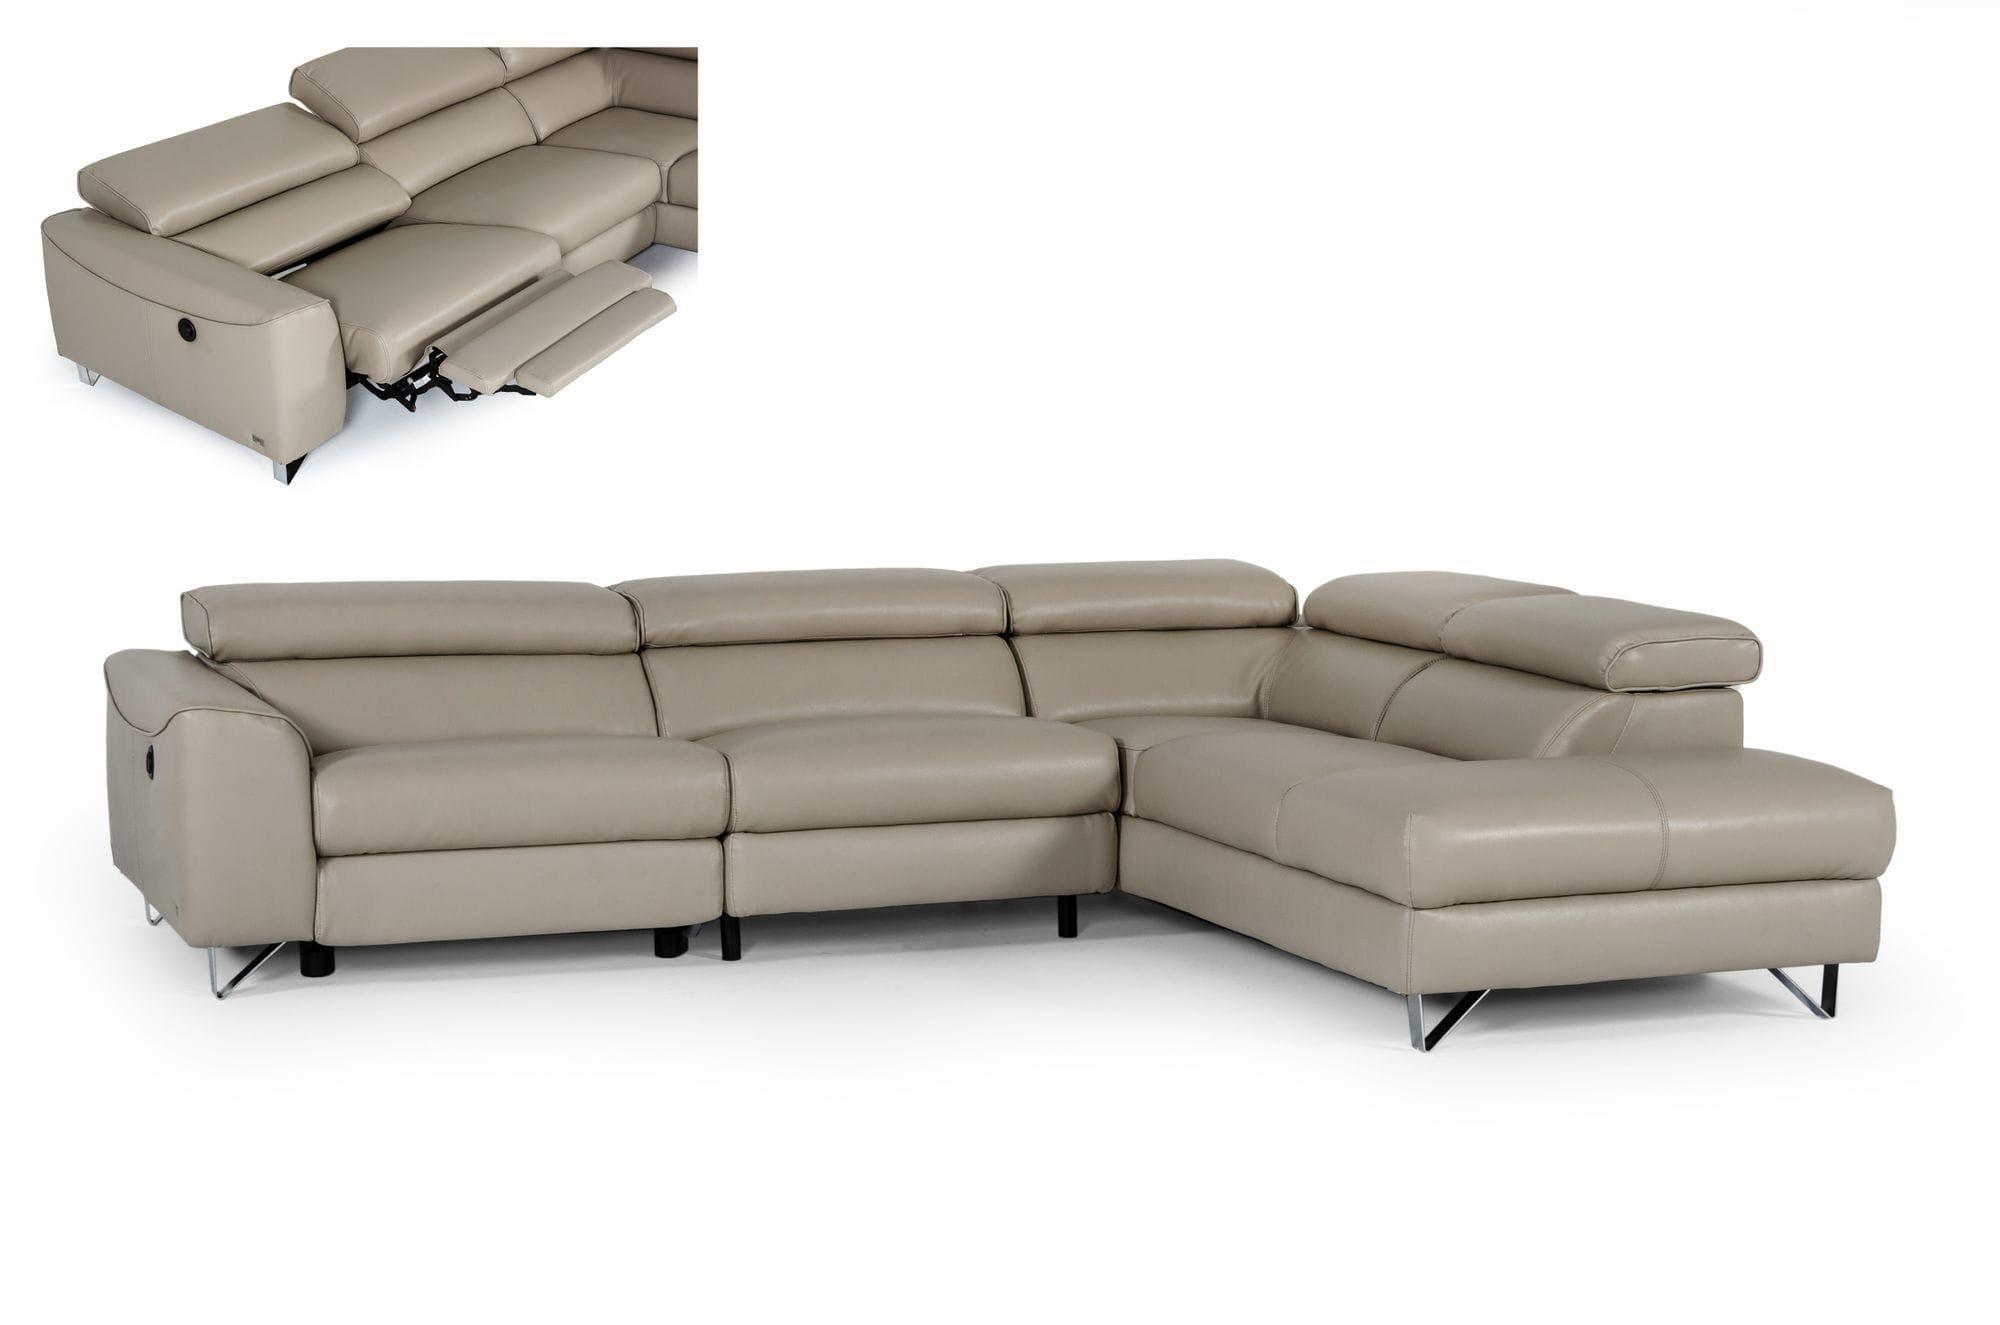 Contemporary, Modern Recliner Sectional VGKNE9112-RAF VGKNE9112-RAF in Taupe Eco-Leather